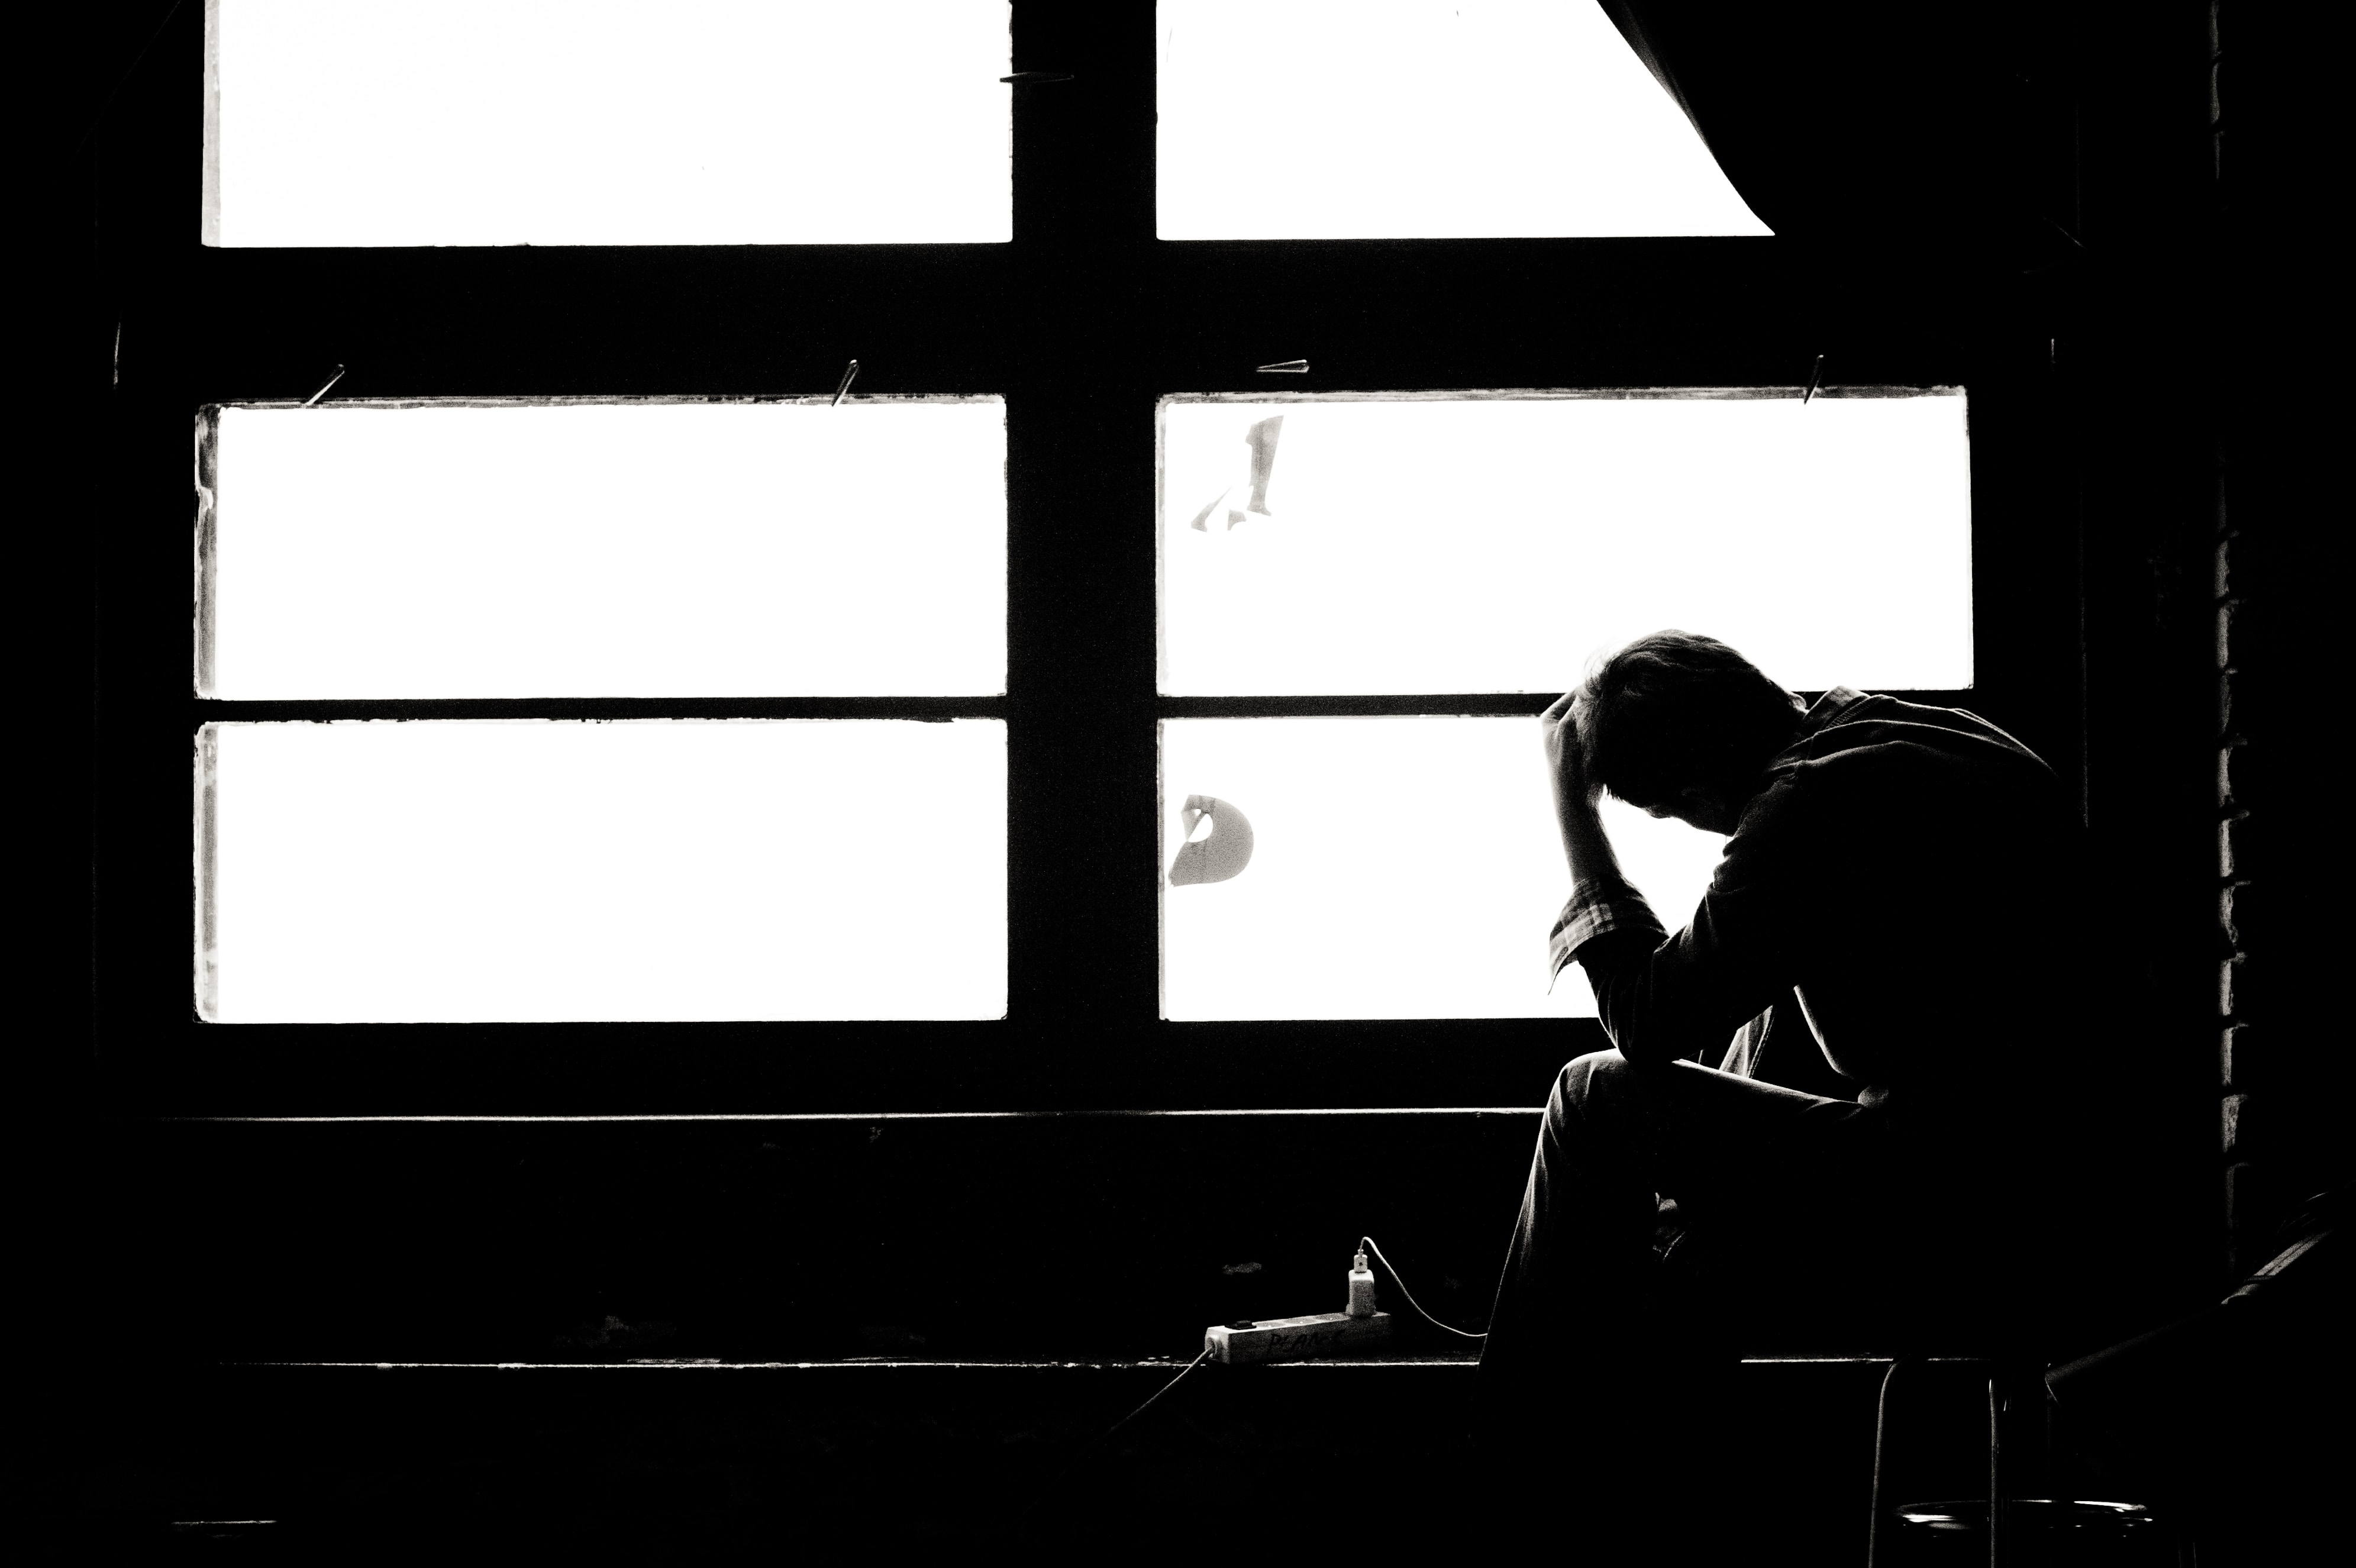 Anxiety at work in Germany: A reflection of mental challenges in working life